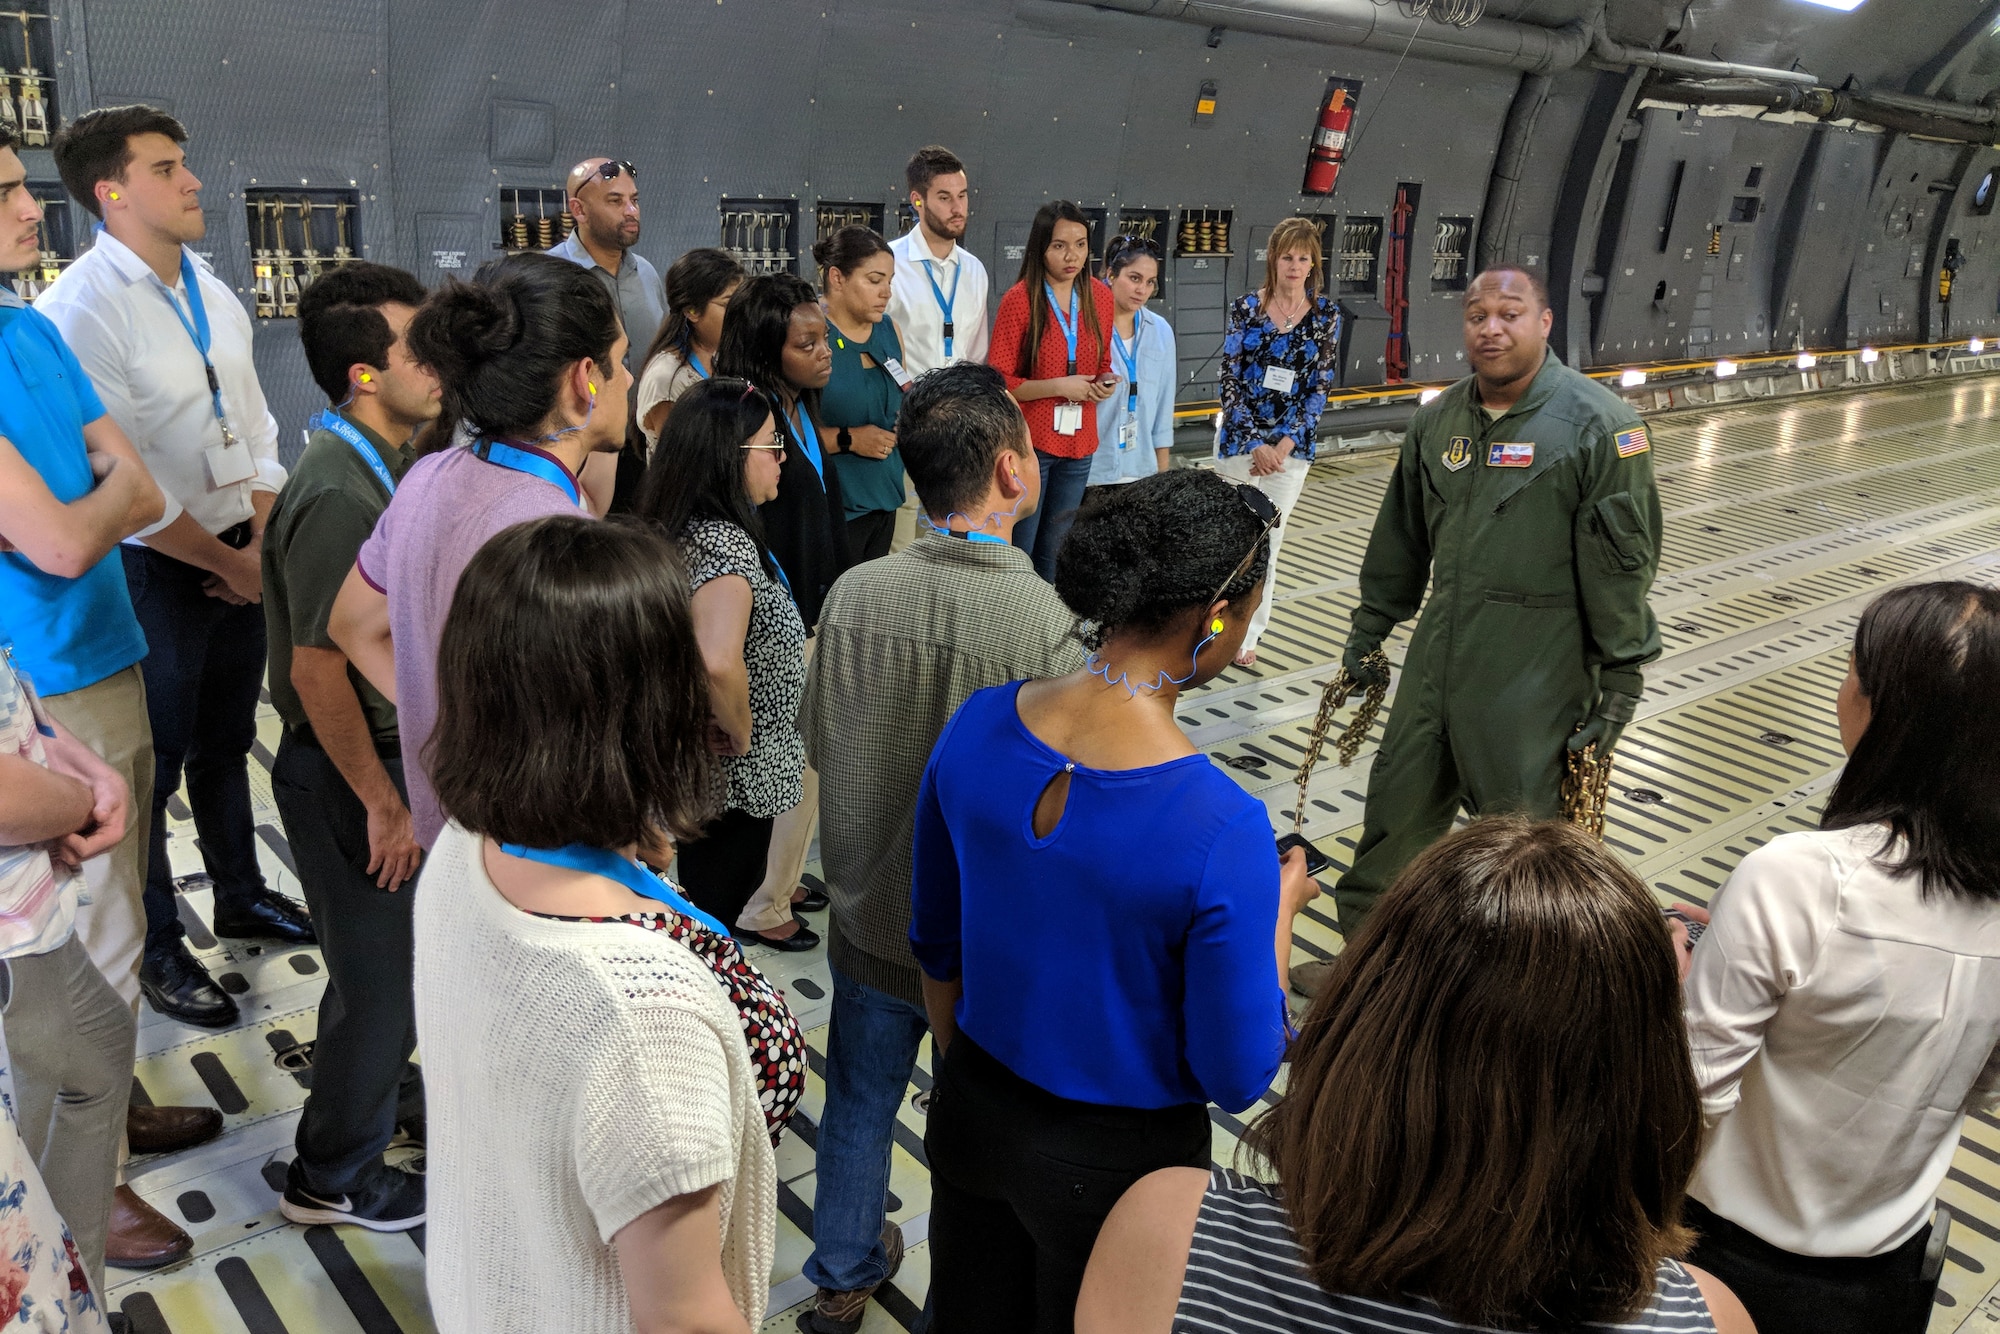 U.S. Air Force Master Sgt. Bryan Boyd, 356th Airlift Squadron loadmaster, gives a brief lesson to college students in what it takes to load a C-5M Super Galaxy during an Air Force Personnel Center Premier College Intern Program symposium tour to the 433rd Airlift Wing May 16, 2018, at Joint Base San Antonio-Lackland, Texas. Tour members were able to handle chains and calculate requirements during the tour. (U.S. Air Force photo by Staff Sgt. Lauren M. Snyder)